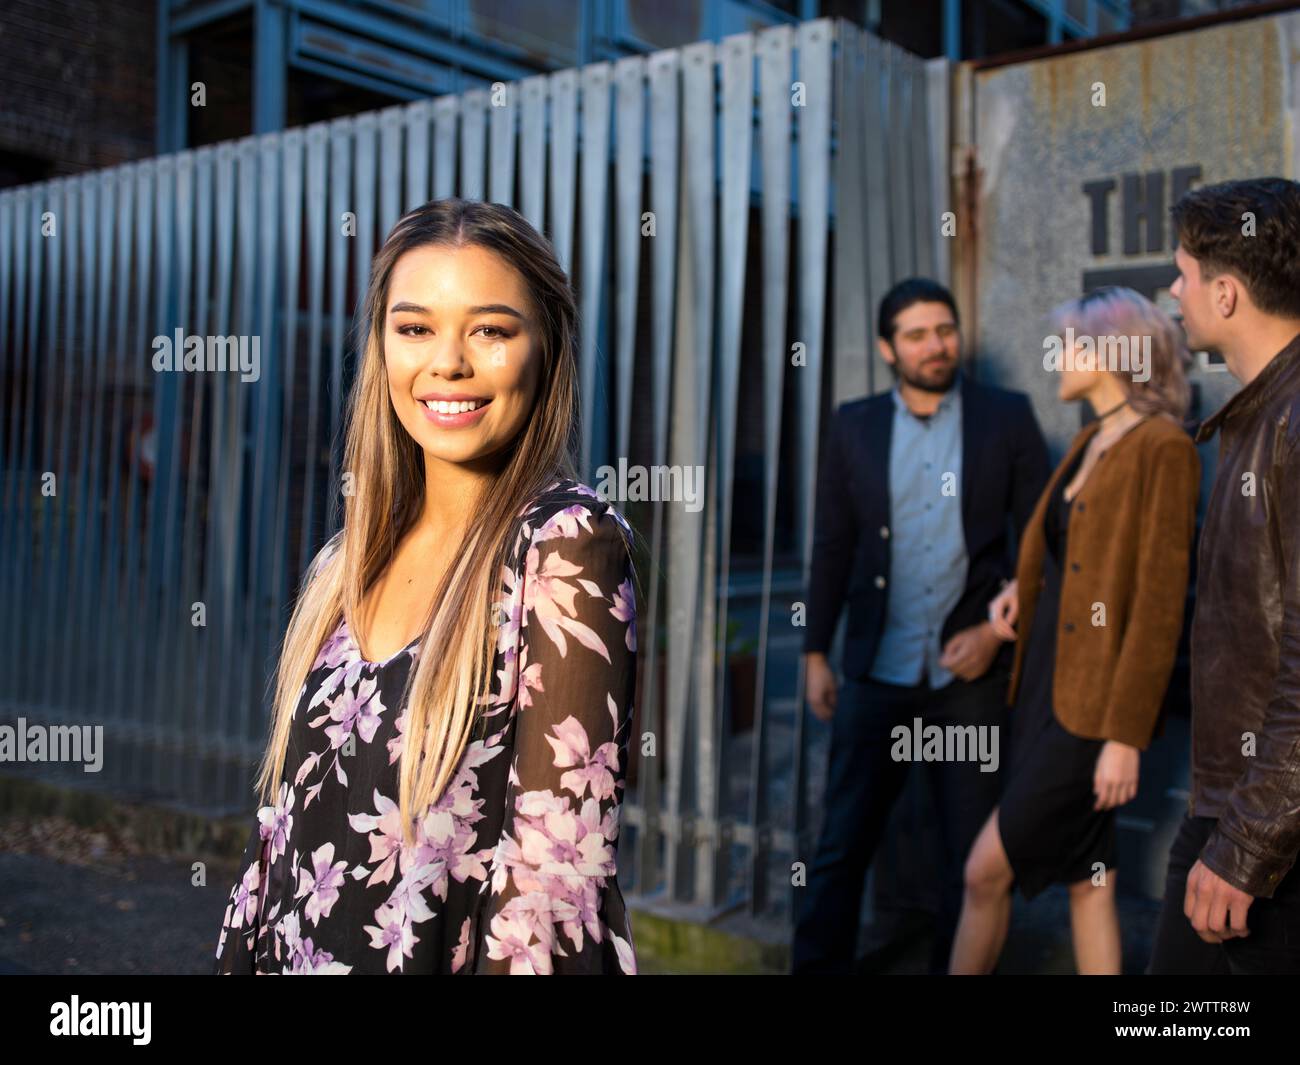 Woman smiling in foreground with people in background Stock Photo